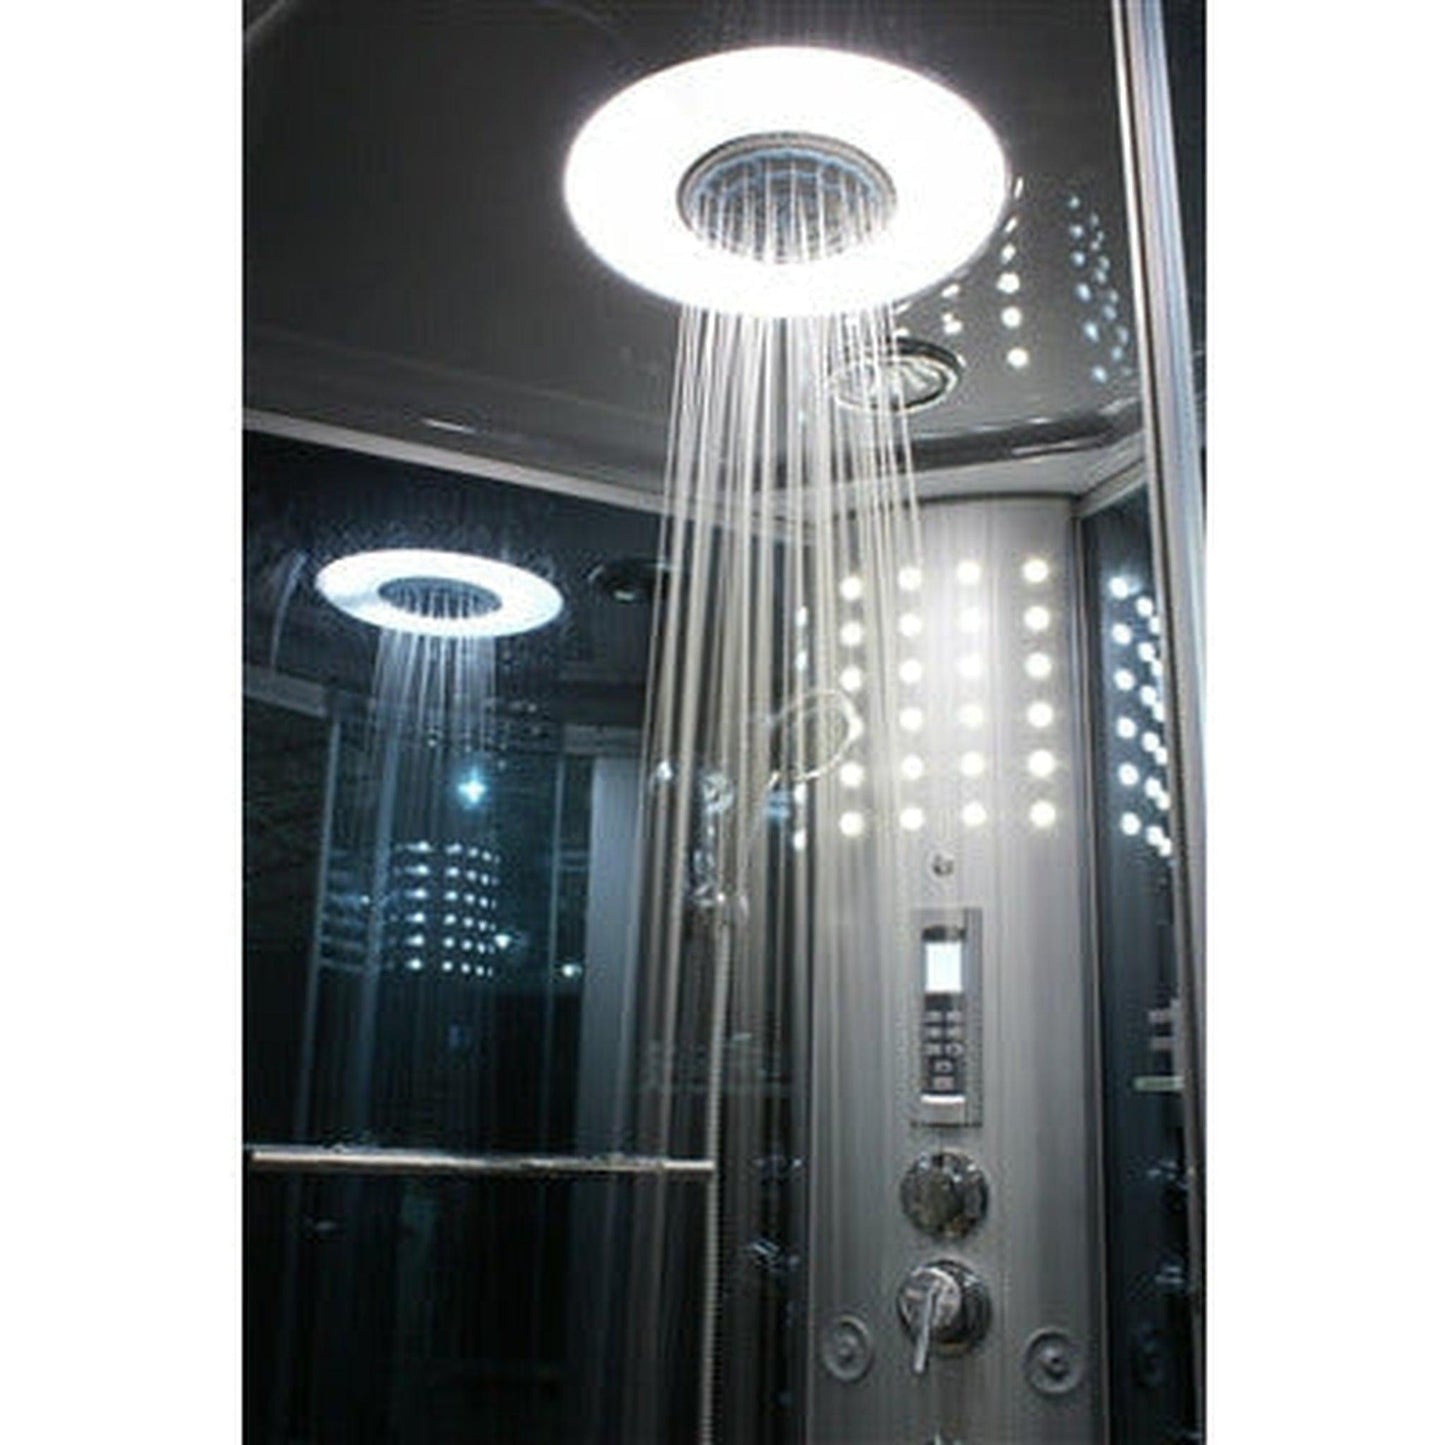 Mesa 54" x 35" x 85" Blue Tempered Glass Freestanding Walk In Steam Shower With Right-Side Door Configuration, 3kW Steam Generator and 12 Acupuncture Water Body Jets